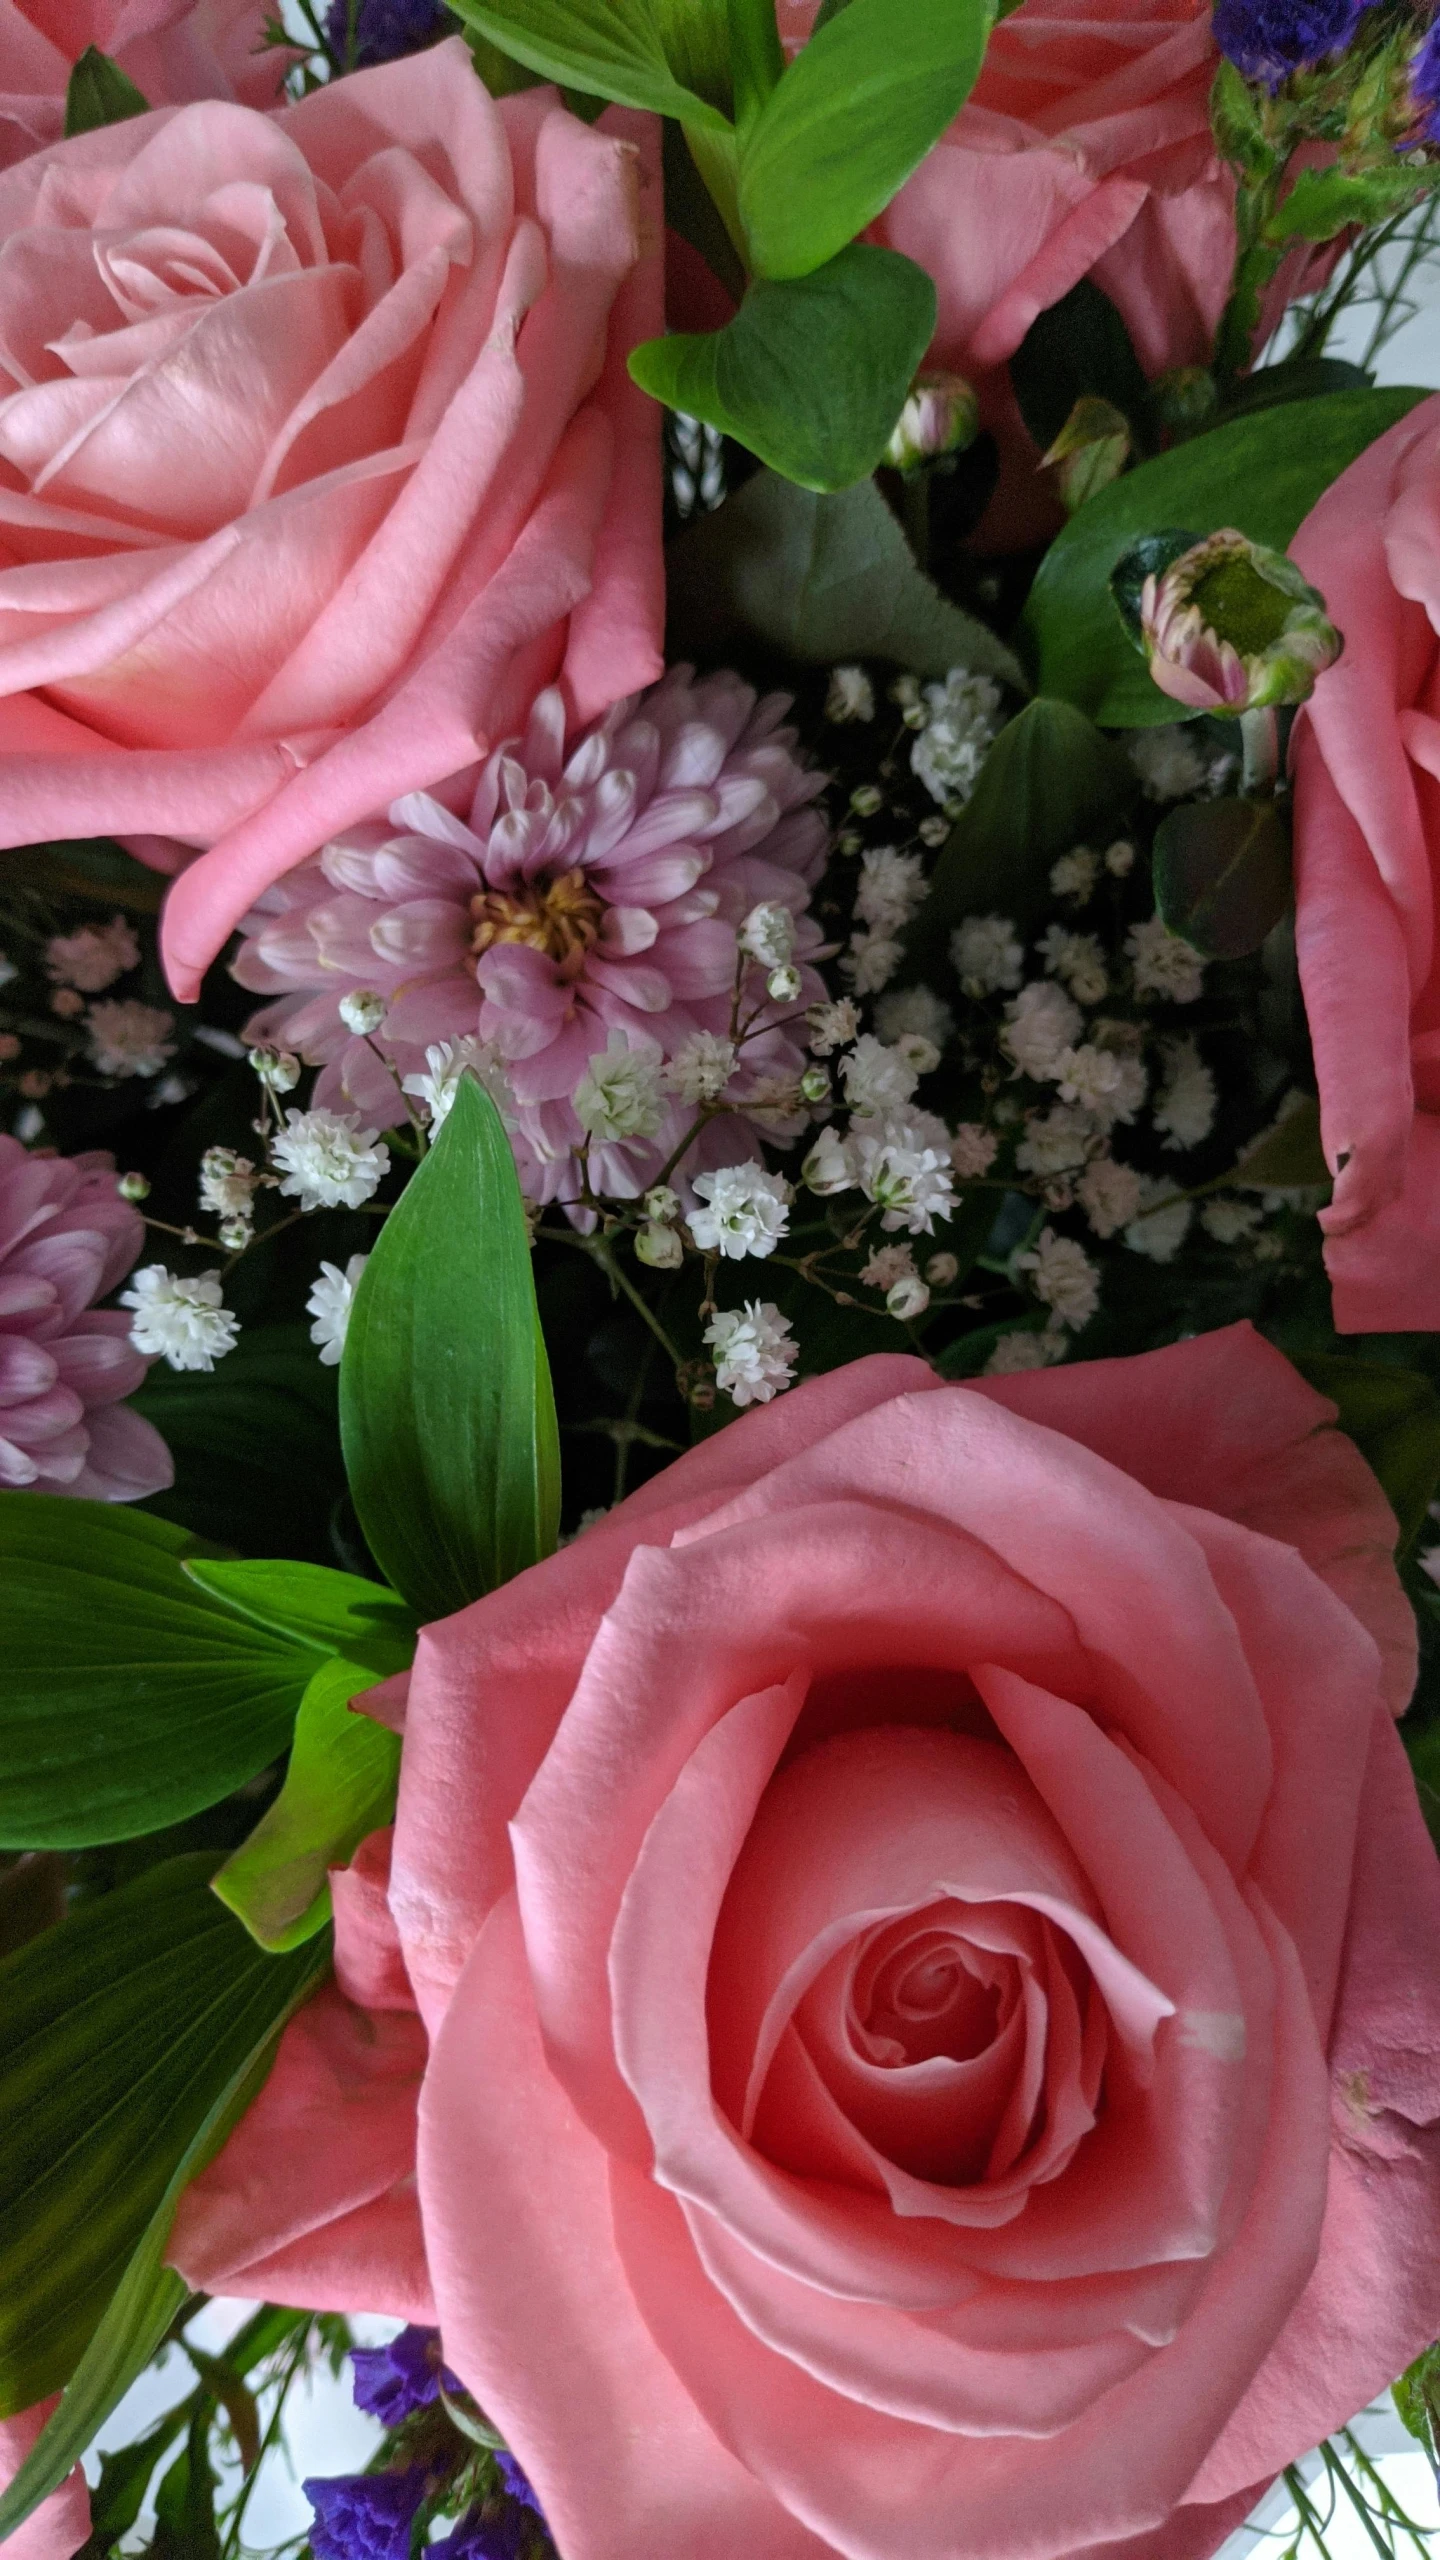 the flower arrangement is surrounded by pink flowers